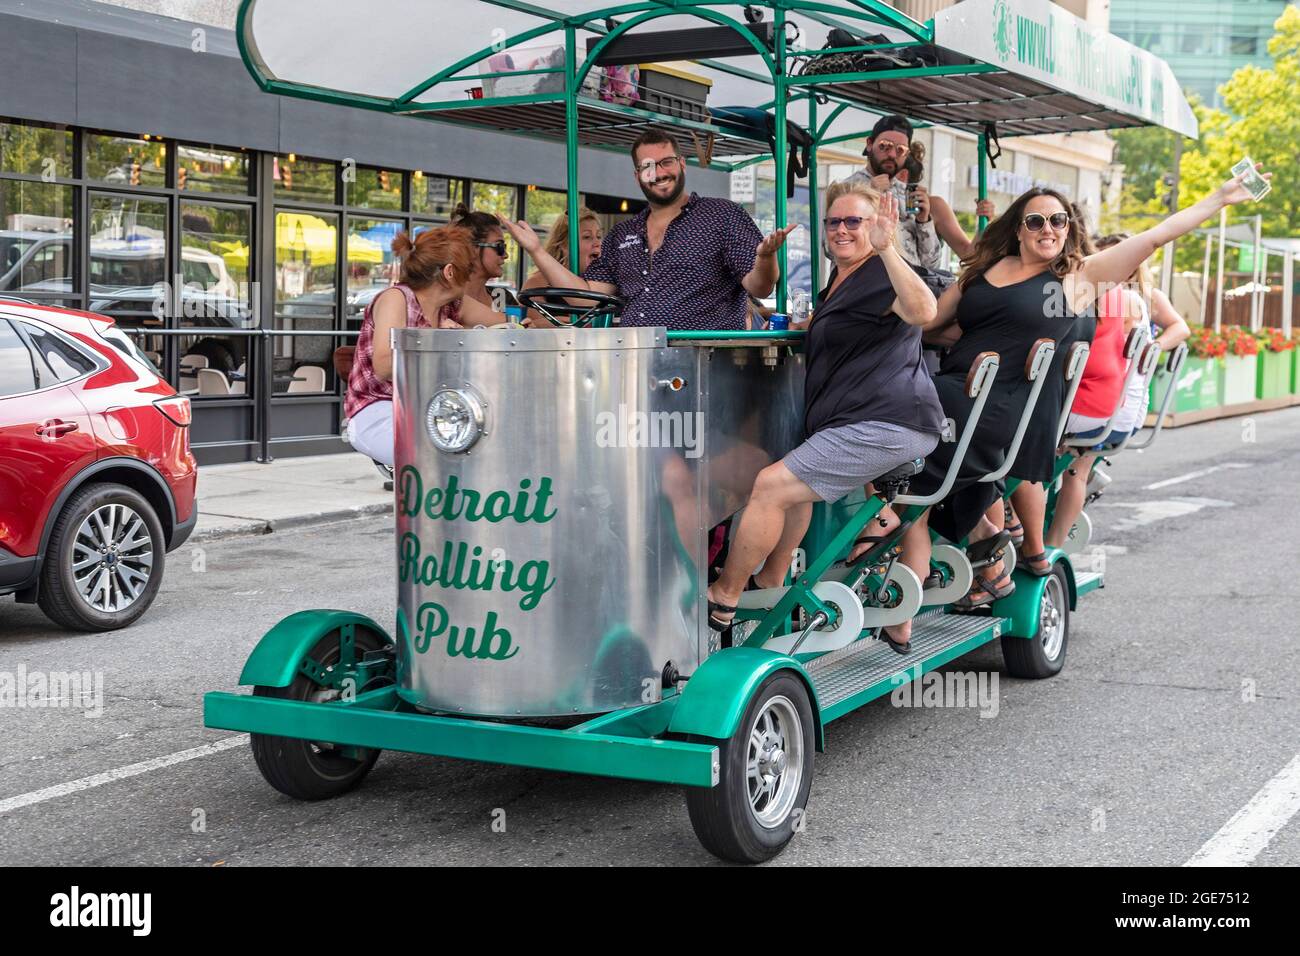 Detroit, Michigan - Happy partiers on a pedal pub in downtown Detroit. State and city laws allow groups to consume their own alcoholic drinks on pedal Stock Photo